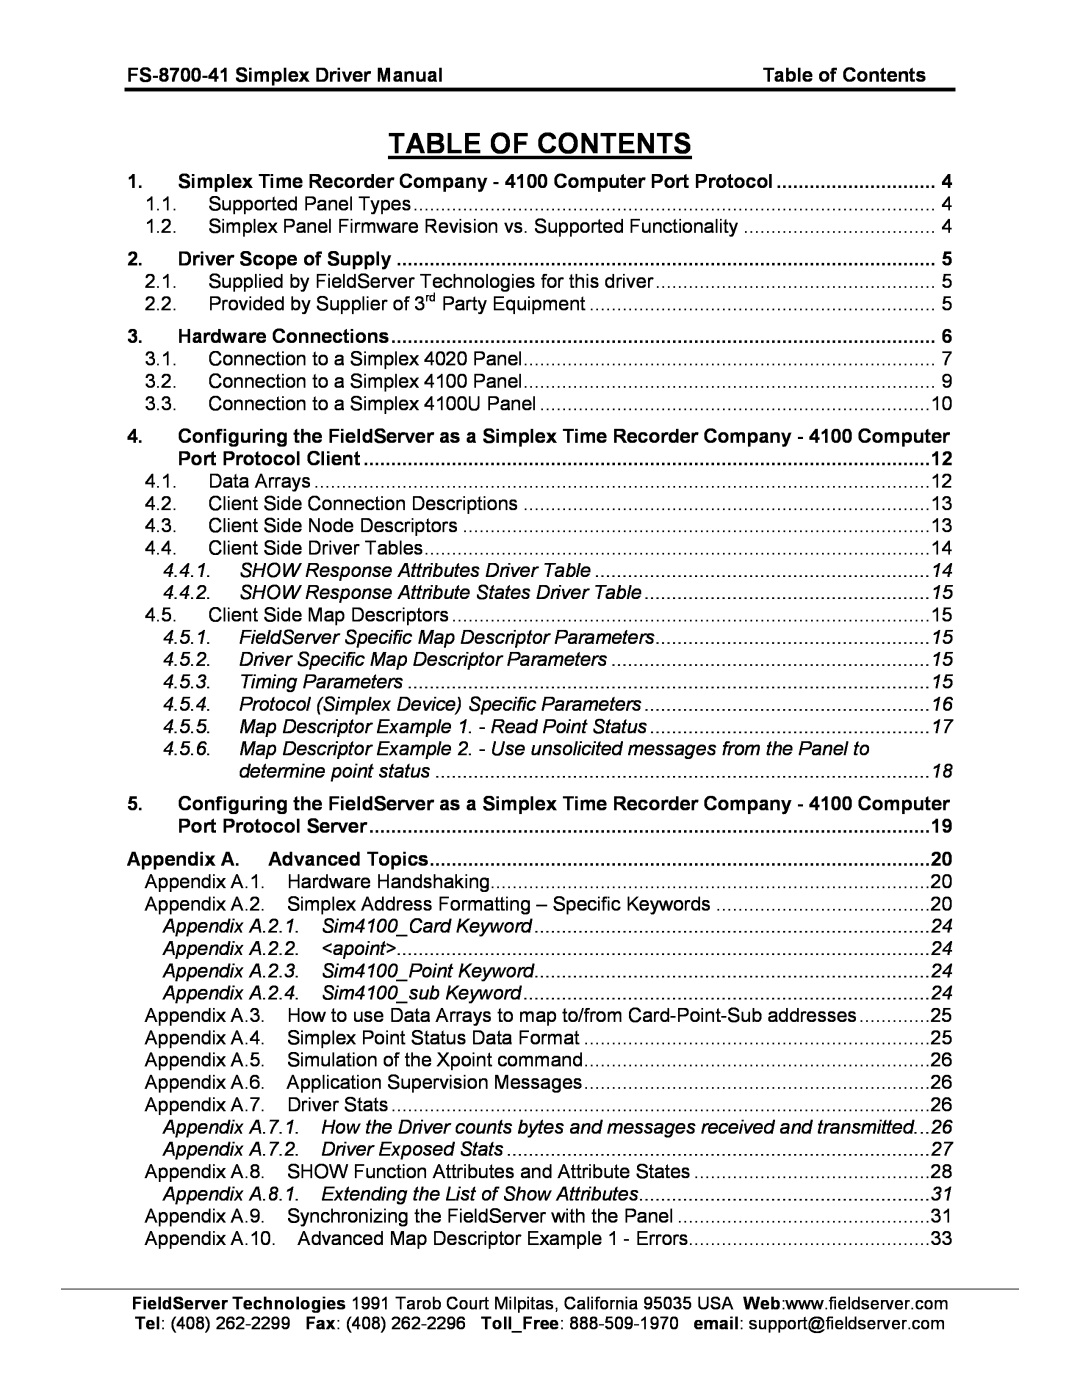 FieldServer FS-8700-41 instruction manual Table Of Contents 